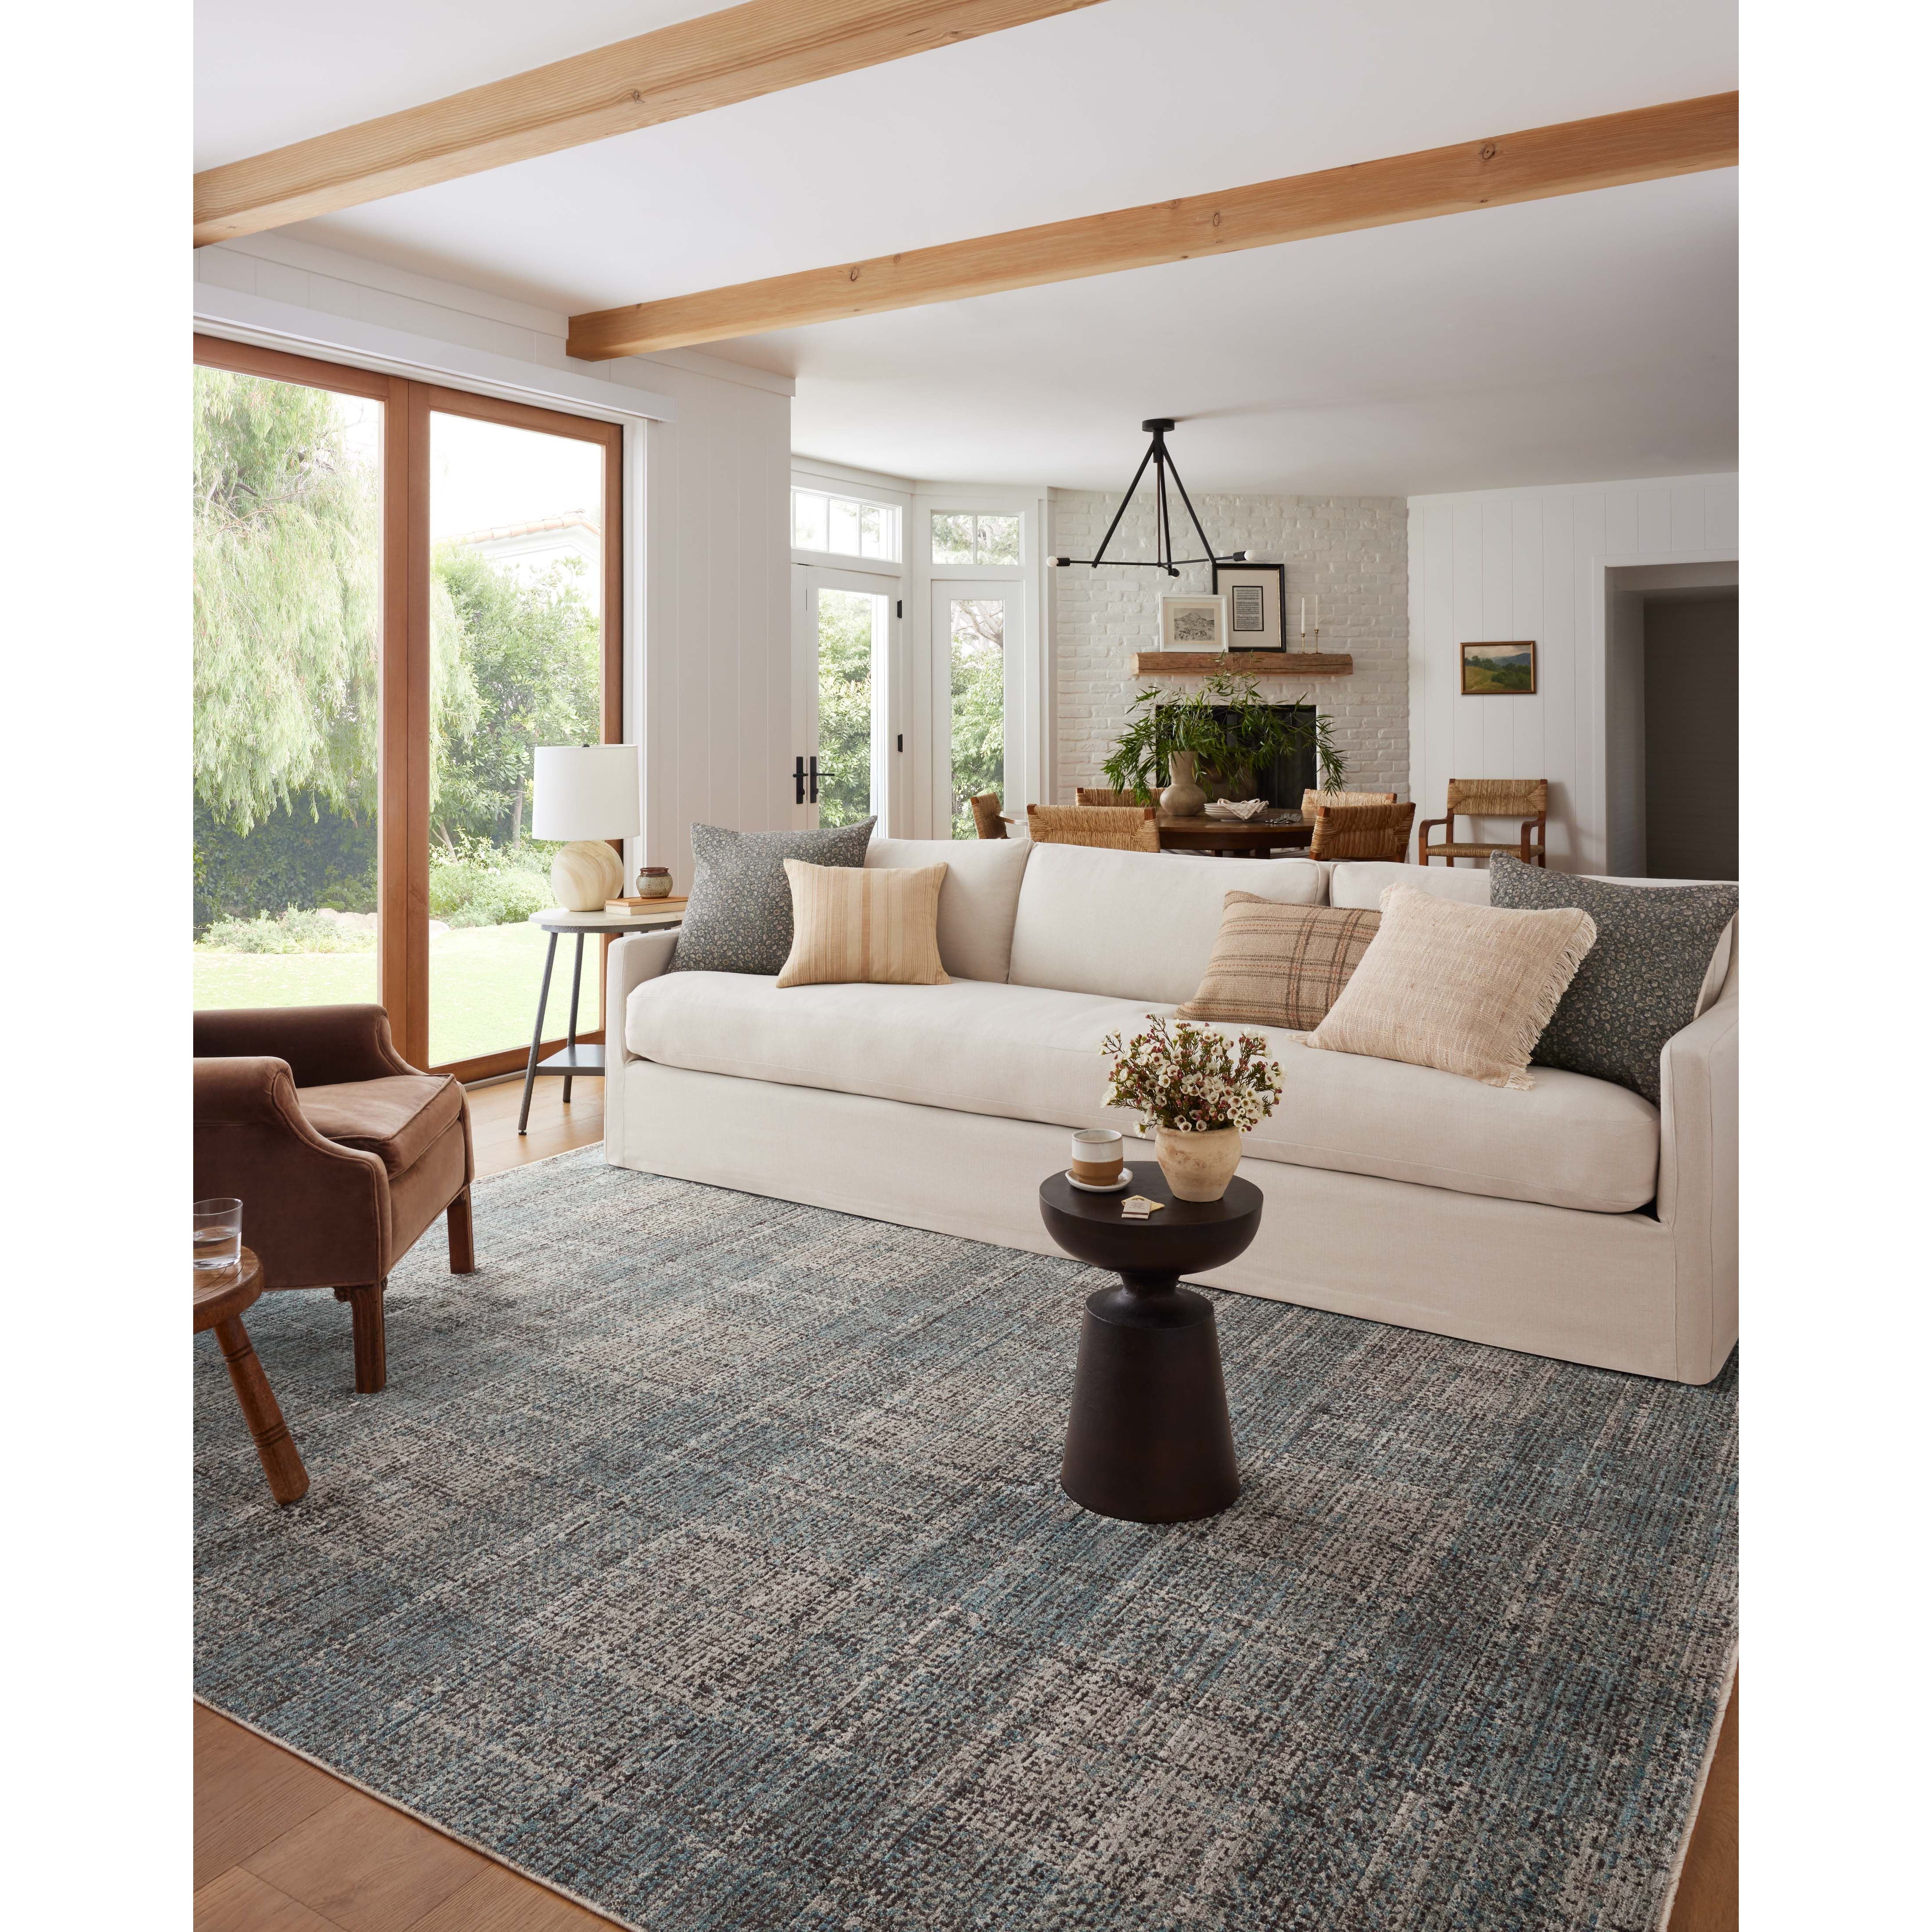 The Ember Collection by Angela Rose x Loloi is a modern flatweave area rug with a timeless plaid pattern that adds depth and coziness to any living room, bedroom, dining room, or hallway. Ember is power-loomed of 100% space-dyed polyester, a durable construction that creates a nuanced depth of color, available in a range of neutral palettes. Amethyst Home provides interior design, new home construction design consulting, vintage area rugs, and lighting in the Calabasas metro area.